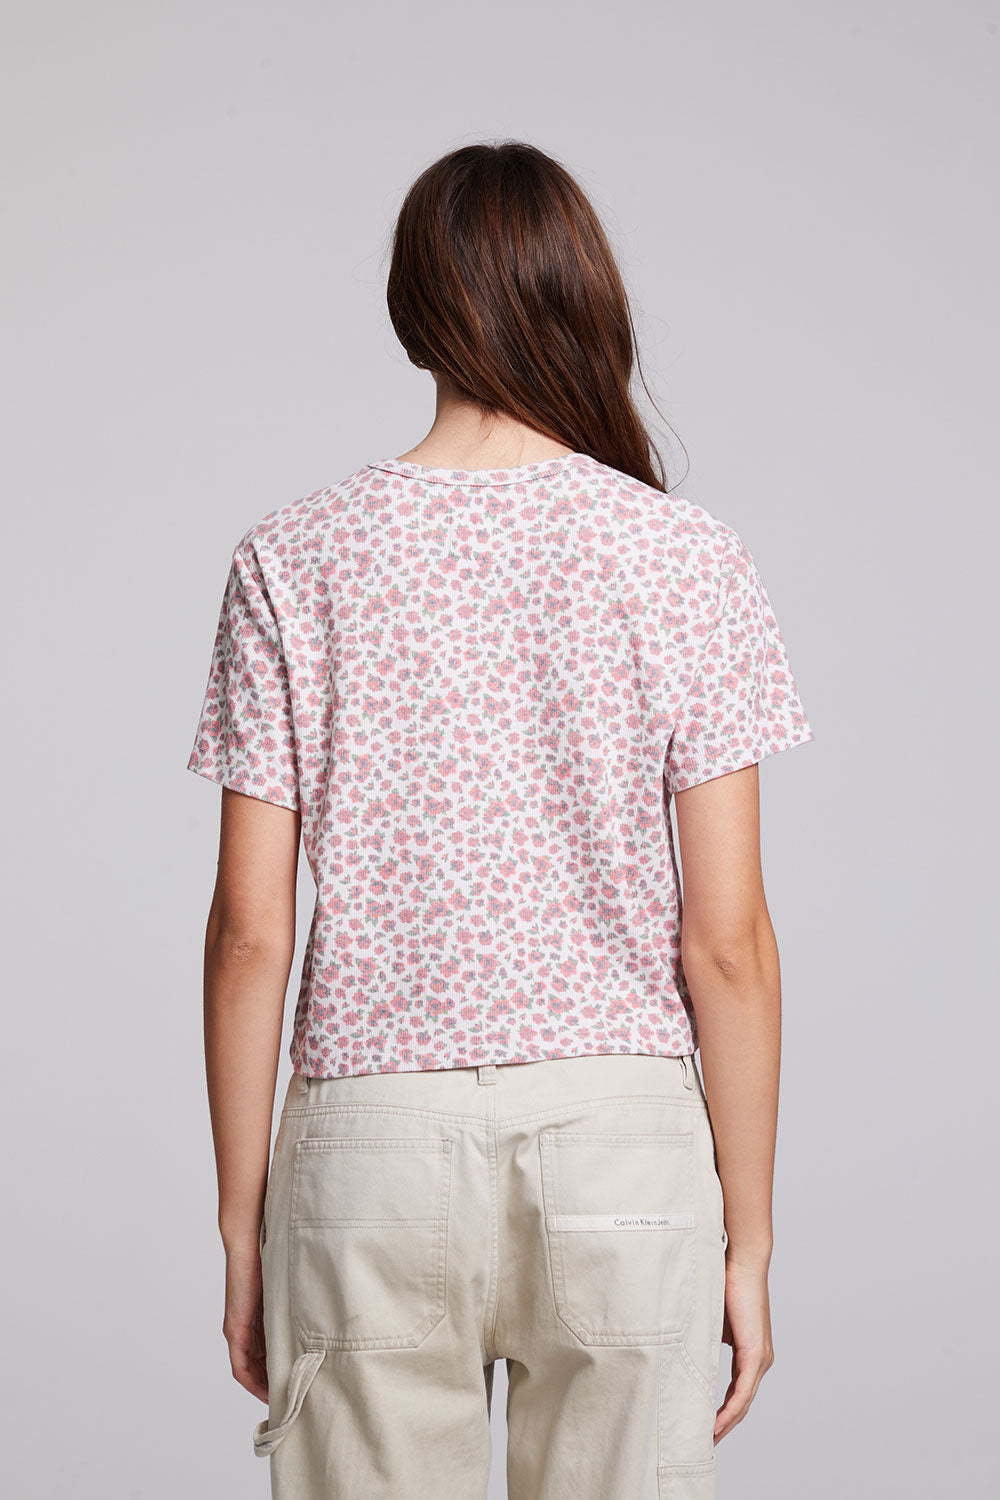 Servino Ditsy Rose Tee WOMENS chaserbrand